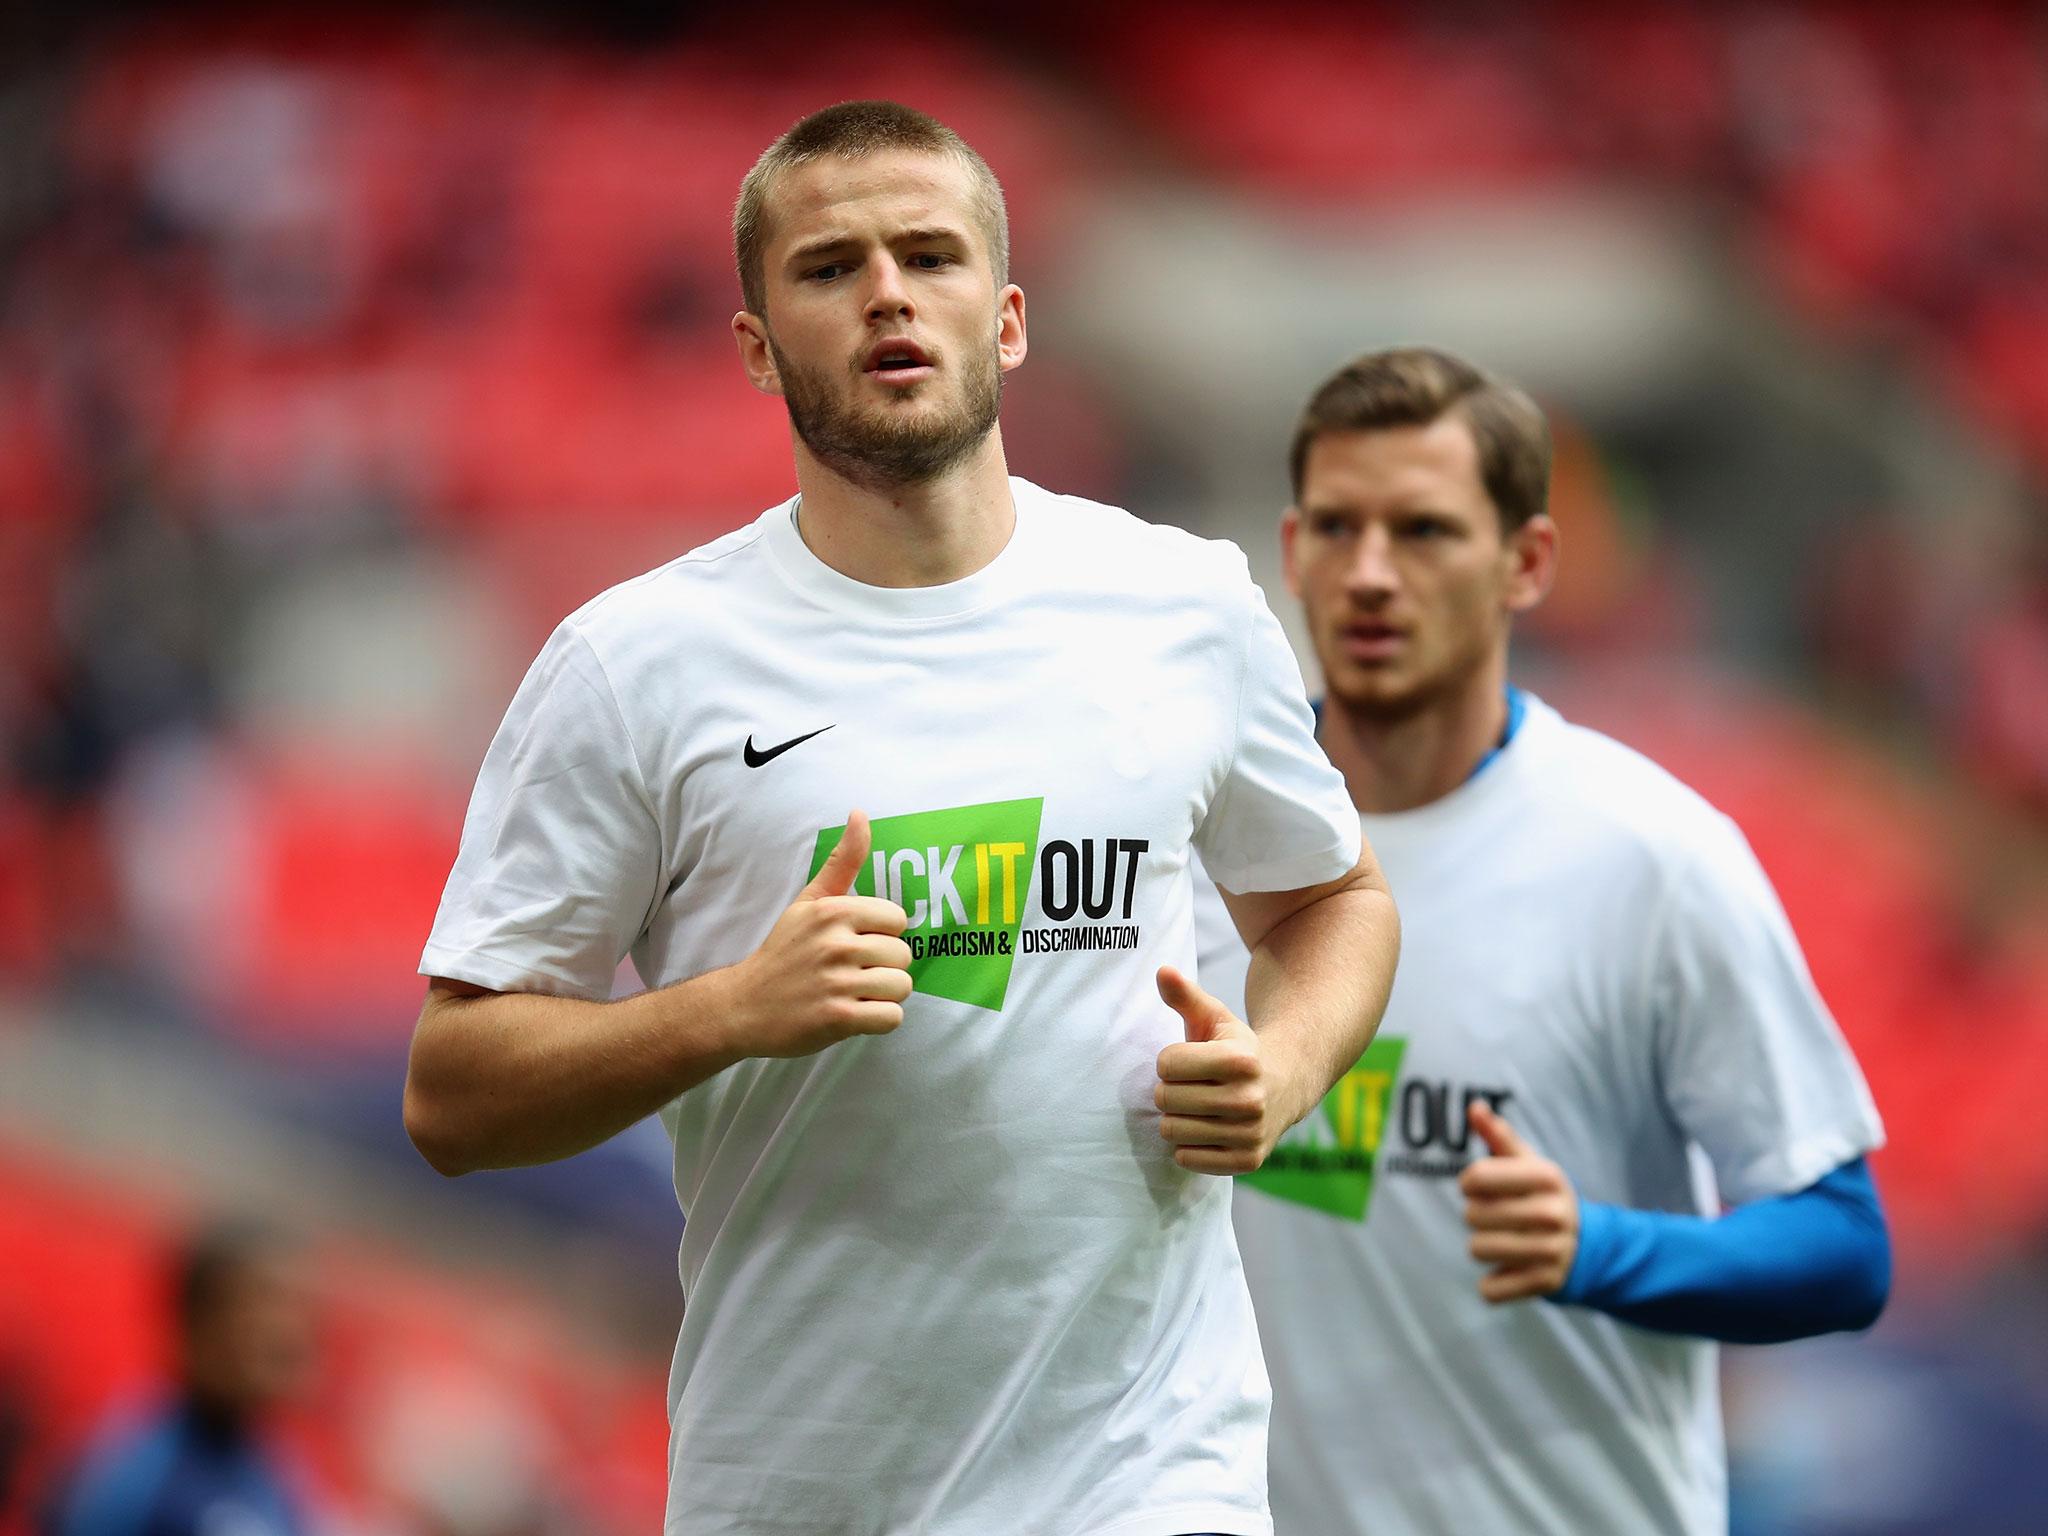 Tottenham held on to Eric Dier amid Manchester United's interest